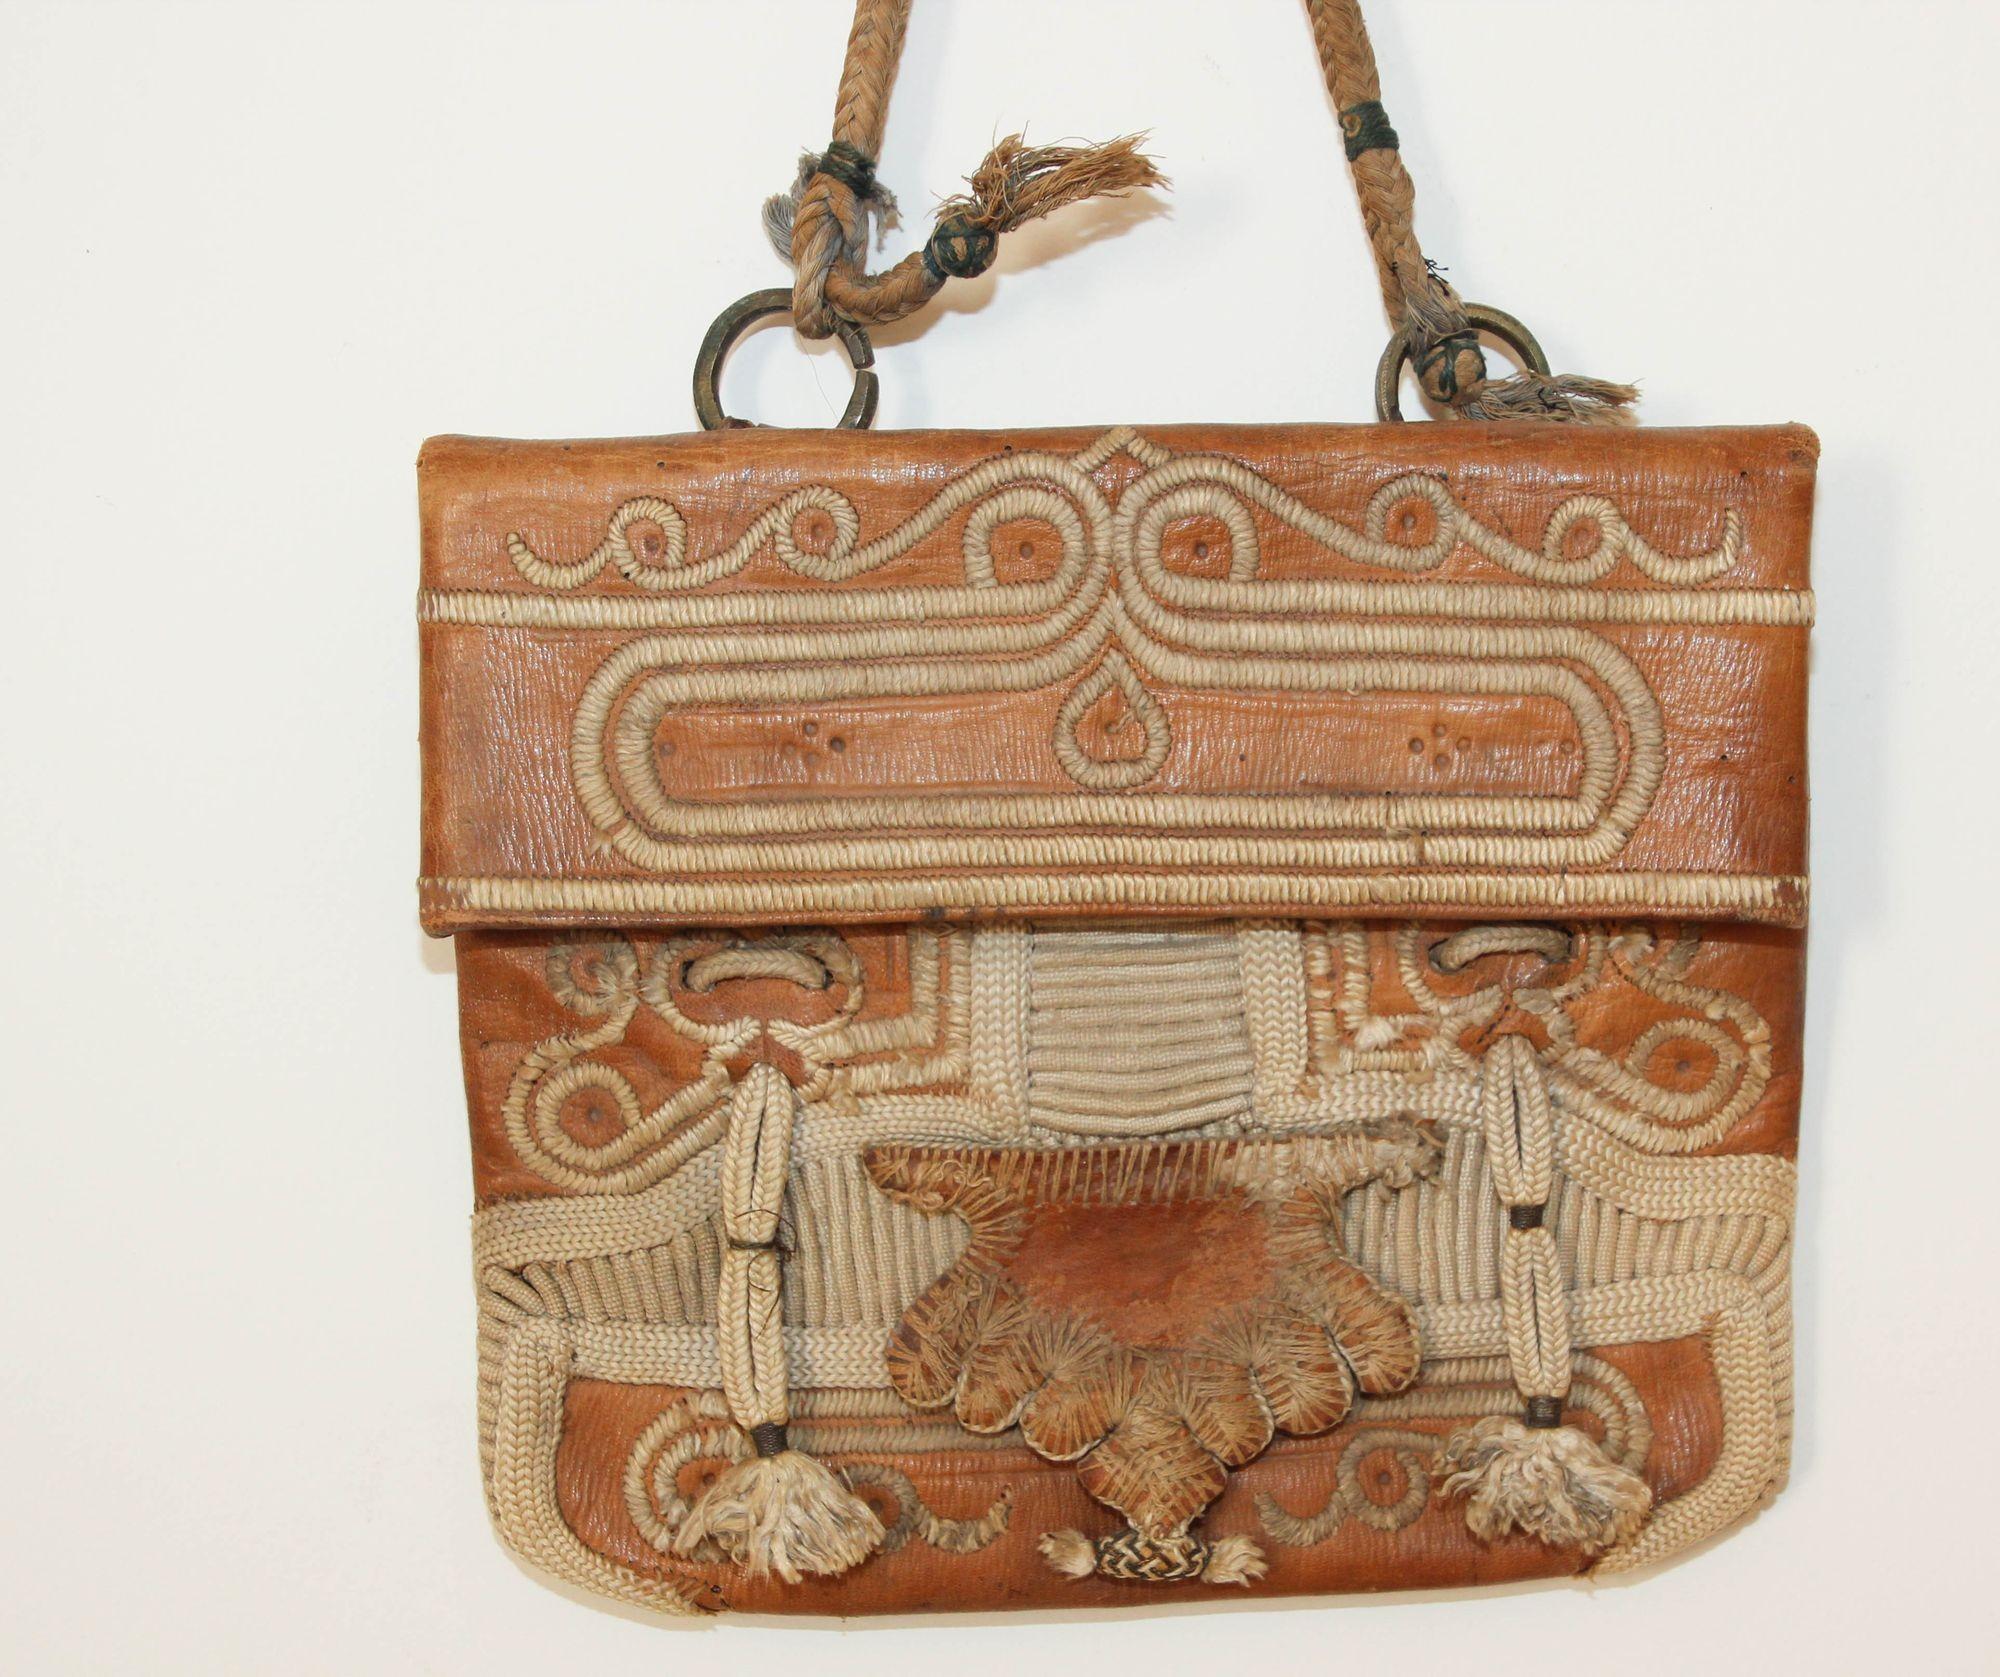 Antique collectible leather African Moroccan satchel bag with flap decorated with traditional Moorish embroideries.
Hand-tooled in Marrakech, this is an old antique shoulder slim bag, merchants in Morocco when traveling used this bag under their